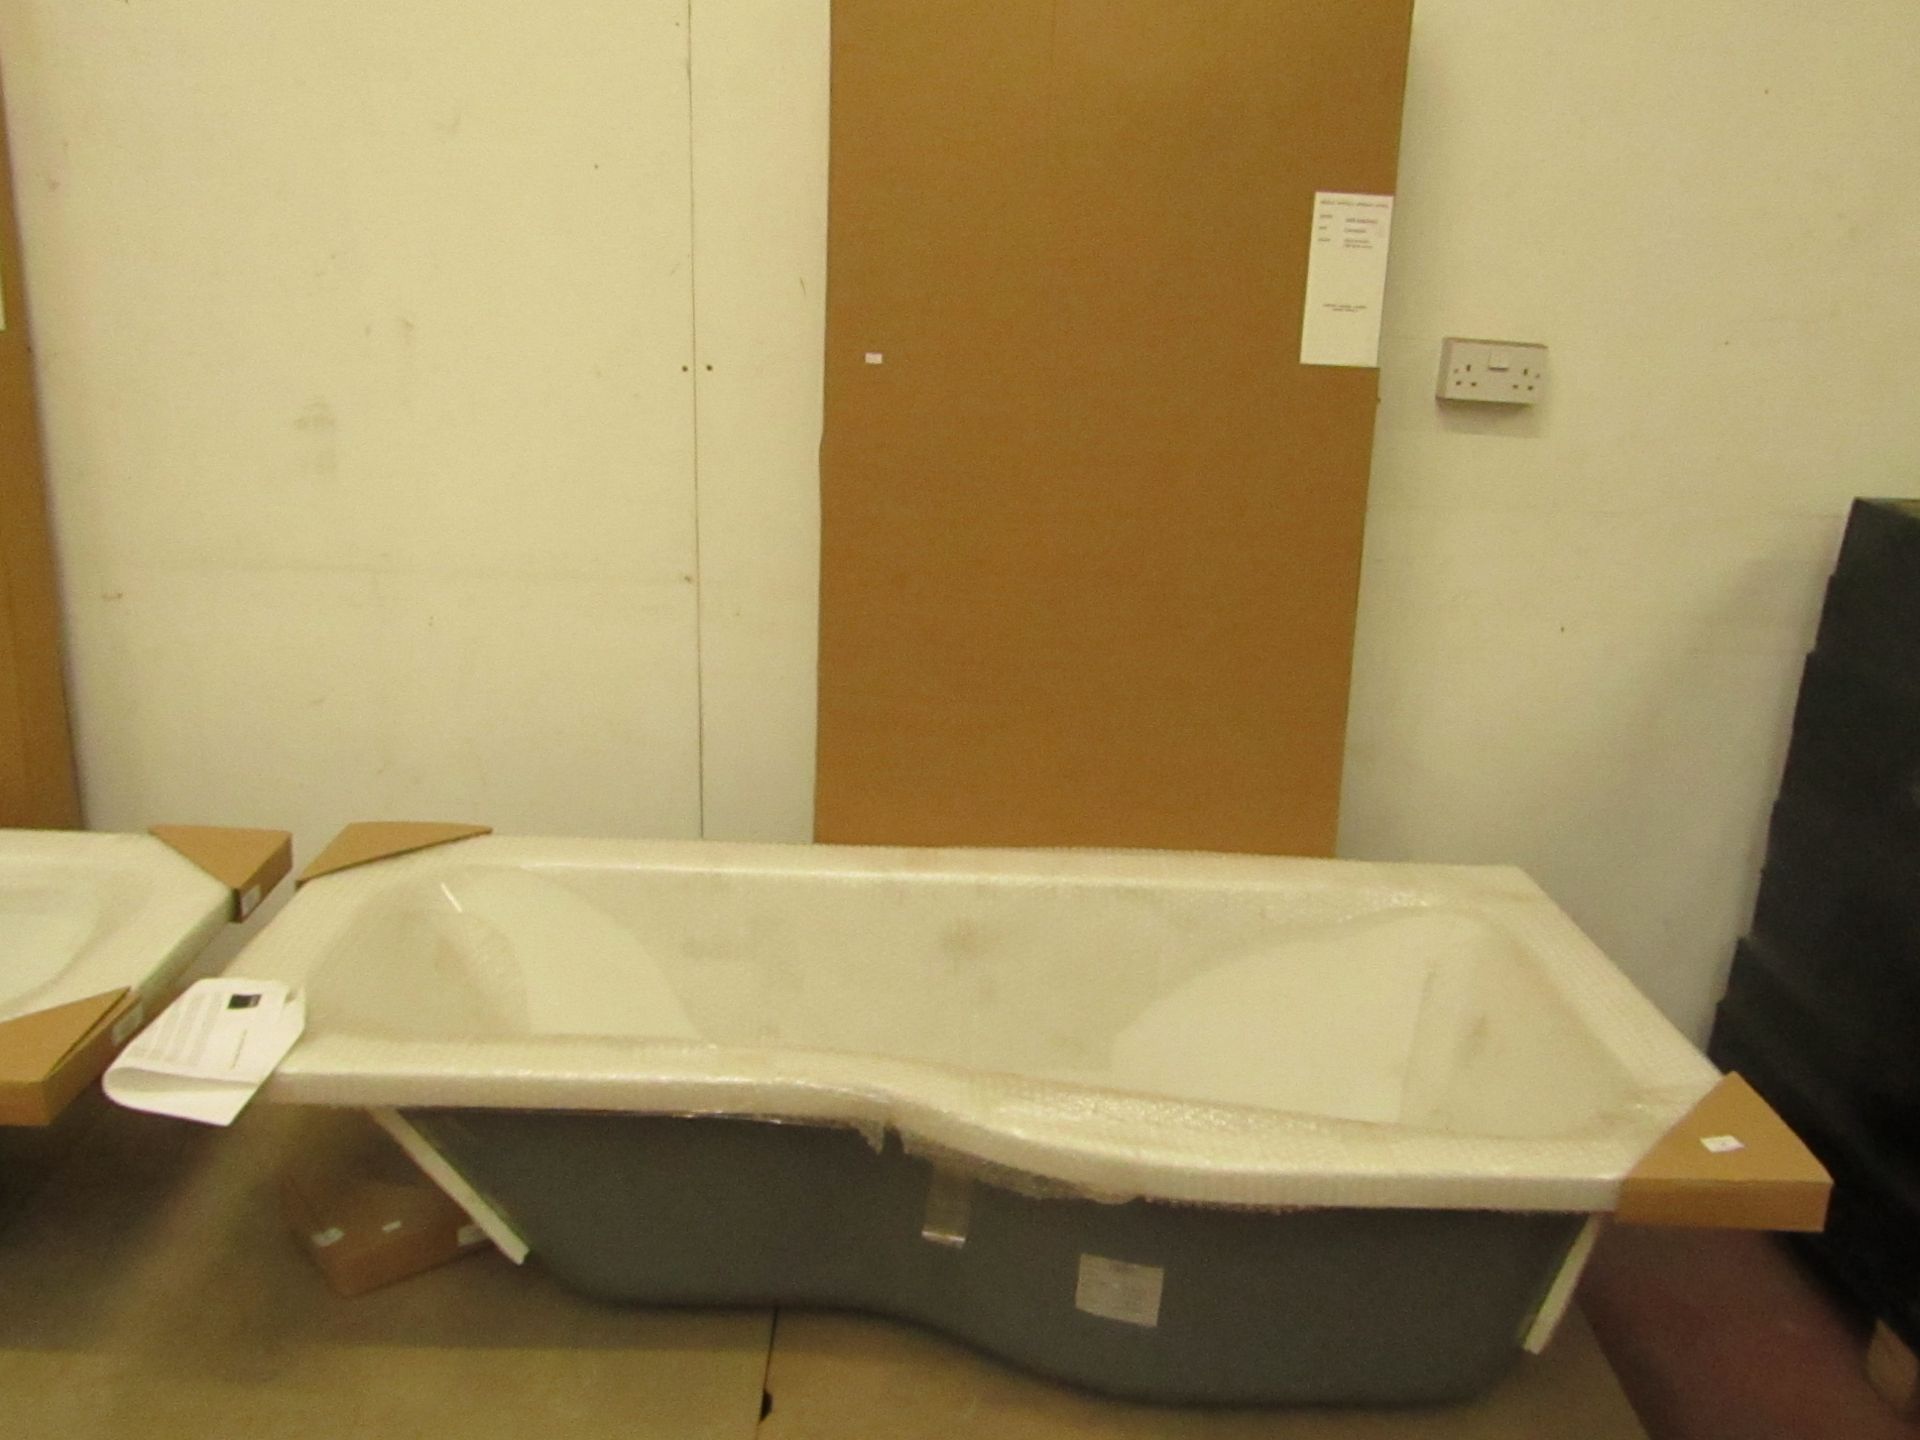 Dovcor Oena 0TH P-shaped Right Hand Bath, 1700 x 700/850mm, with feet pack. New in packaging, - Image 3 of 3